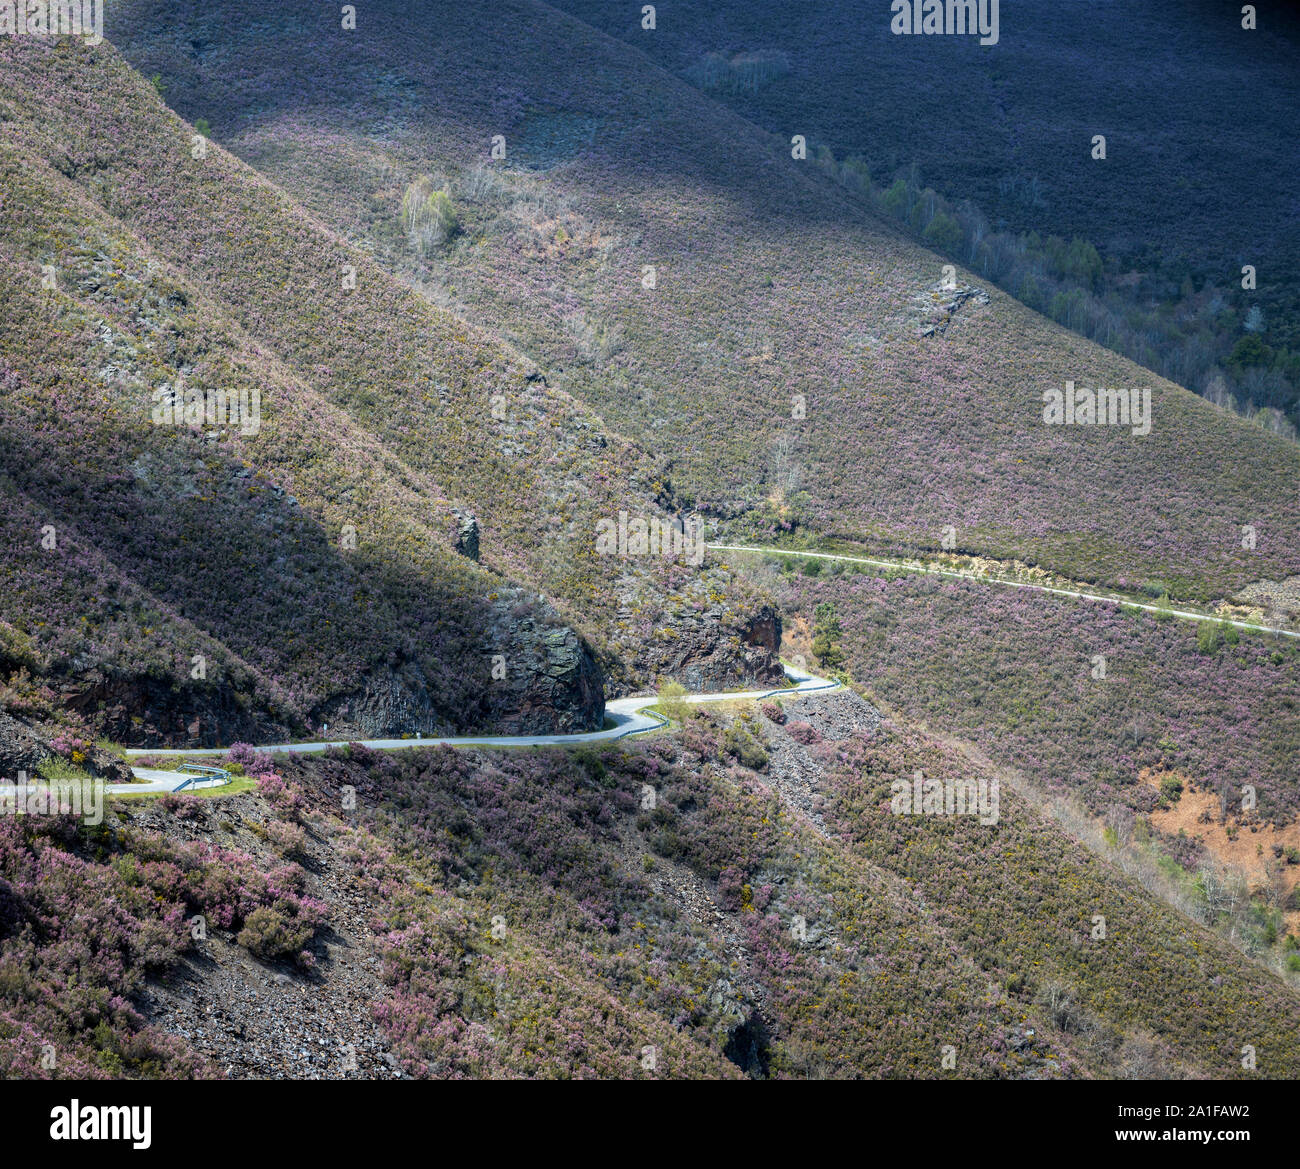 Mountain road winding between heather-covered slopes, in the Mountains of Courel geopark Stock Photo